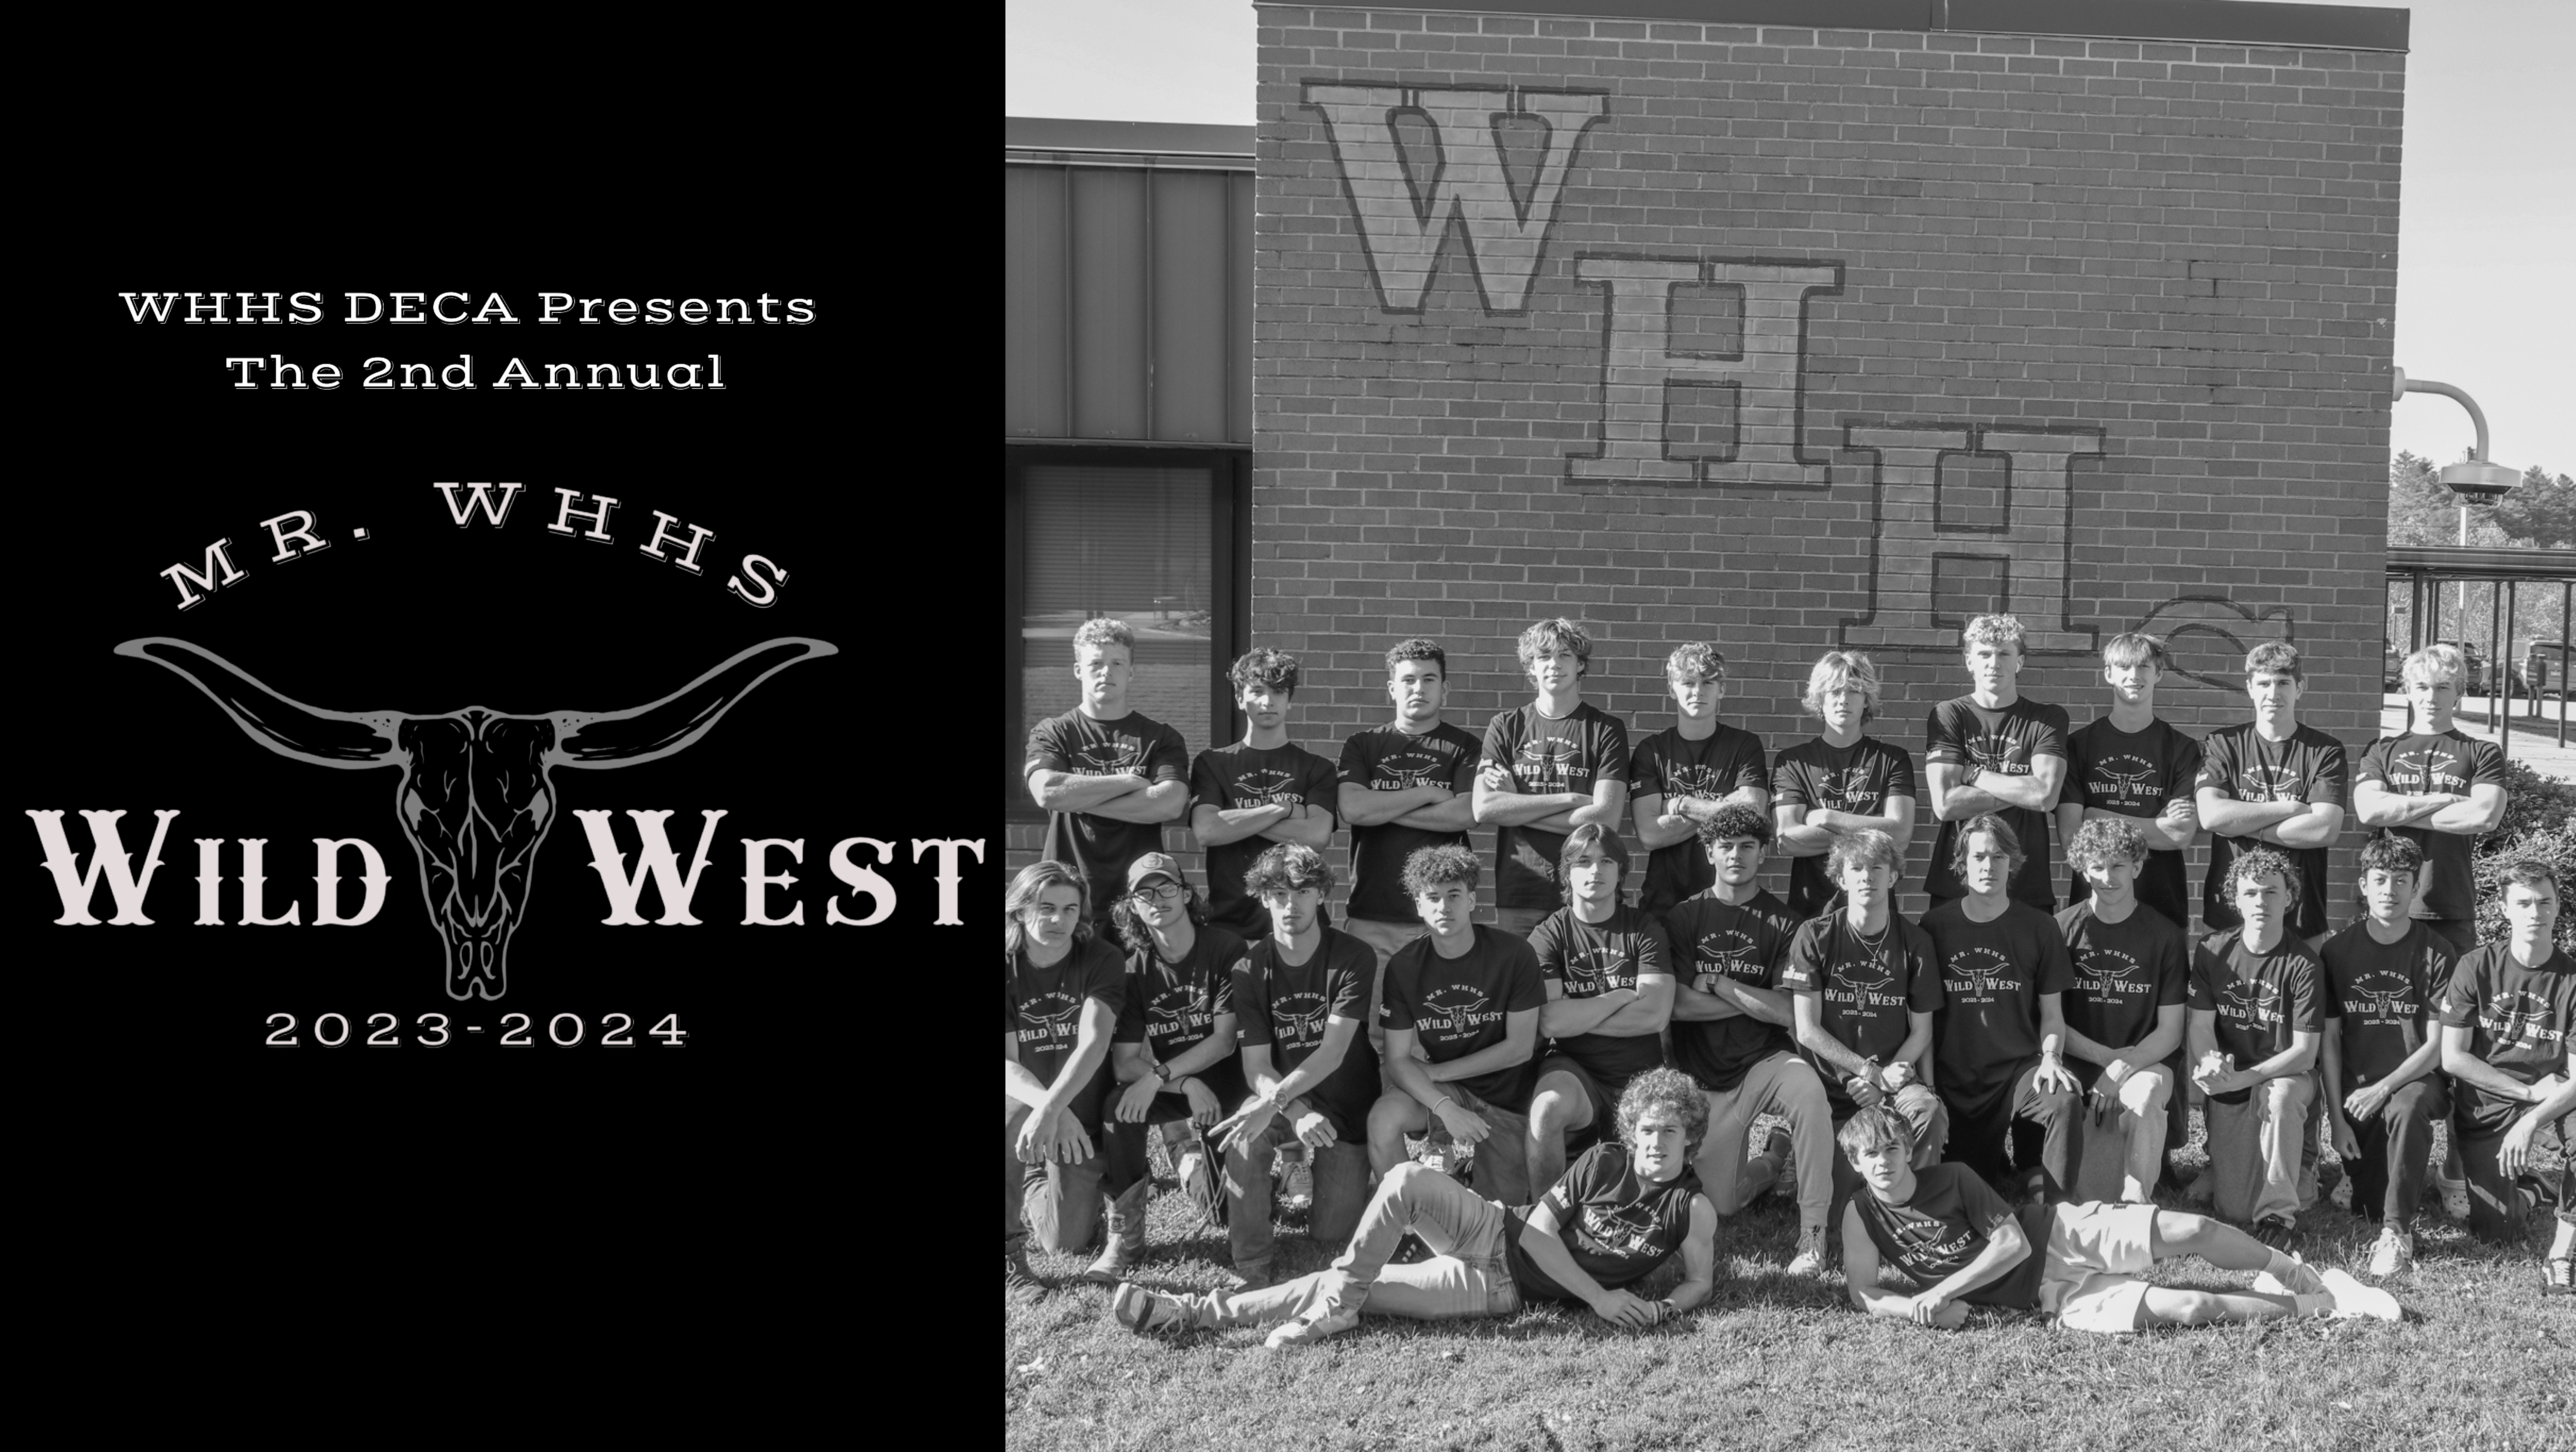 An image of text that says "WHHS DECA presents the 2nd annual Mr. WHHS Wild West. 2023-2024. There is a group photo of about 30 Mr. WHHS contestants in matching t-shirts.